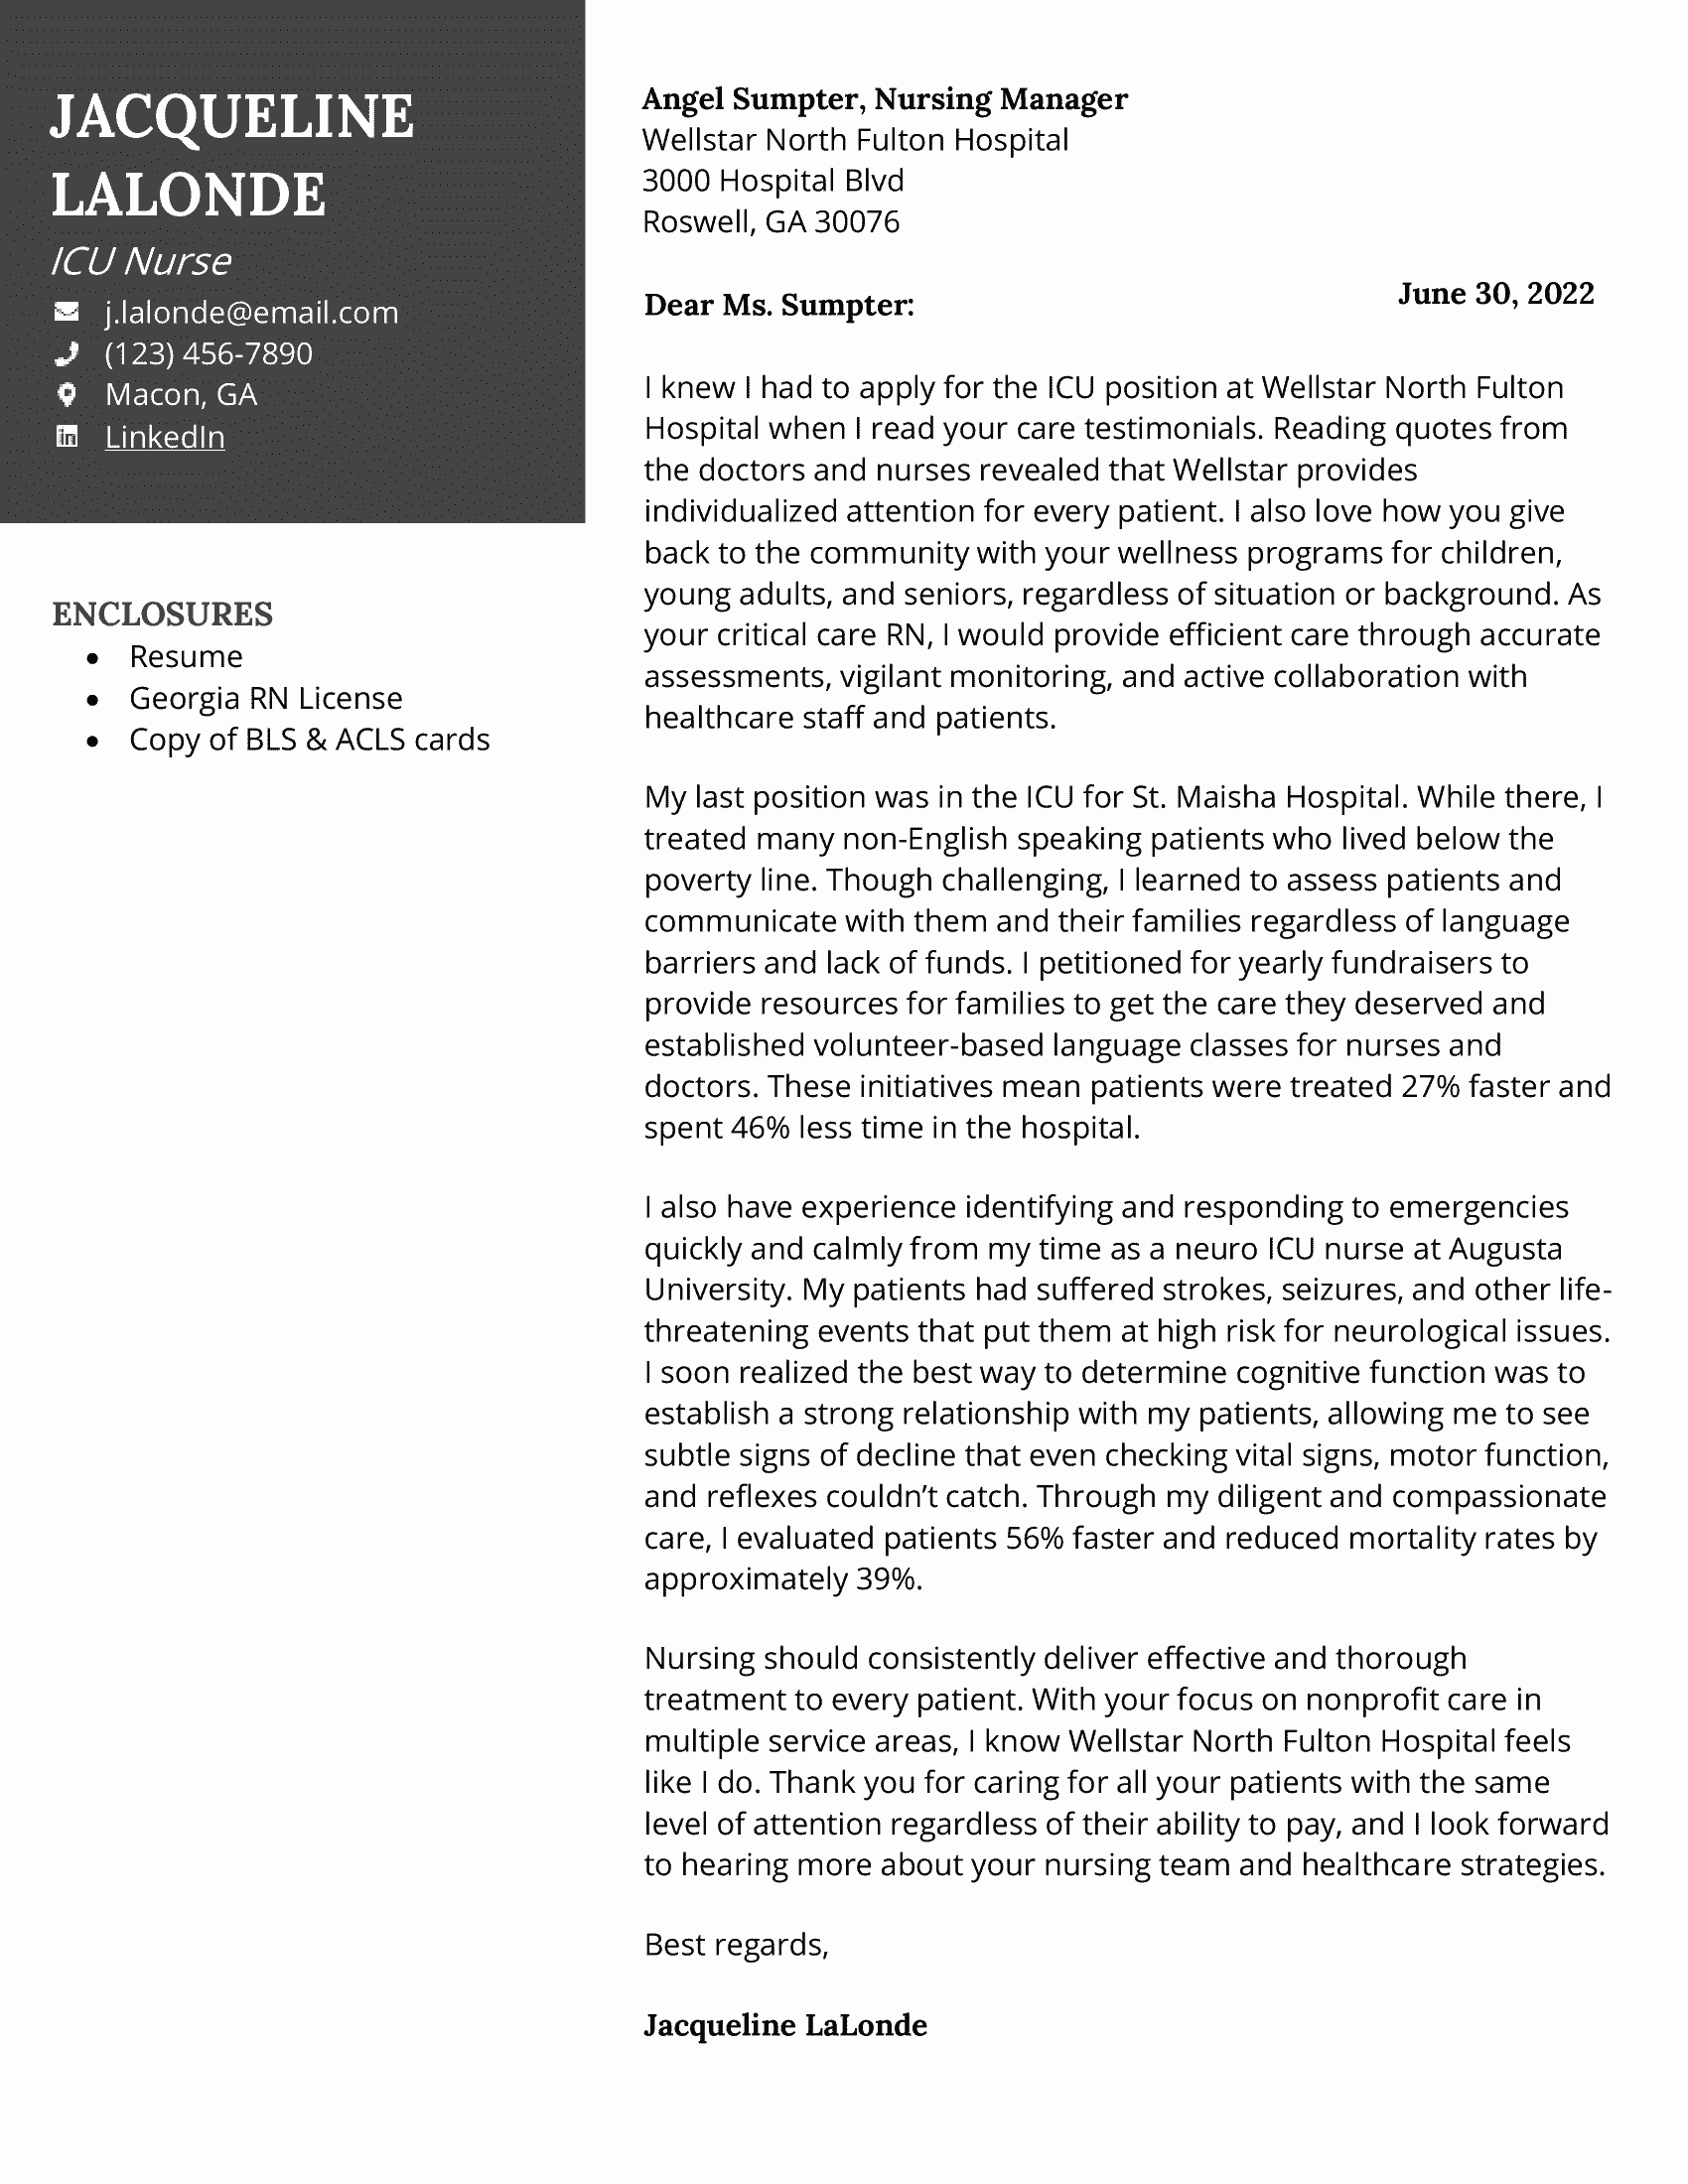 ICU nurse cover letter example with black contact header